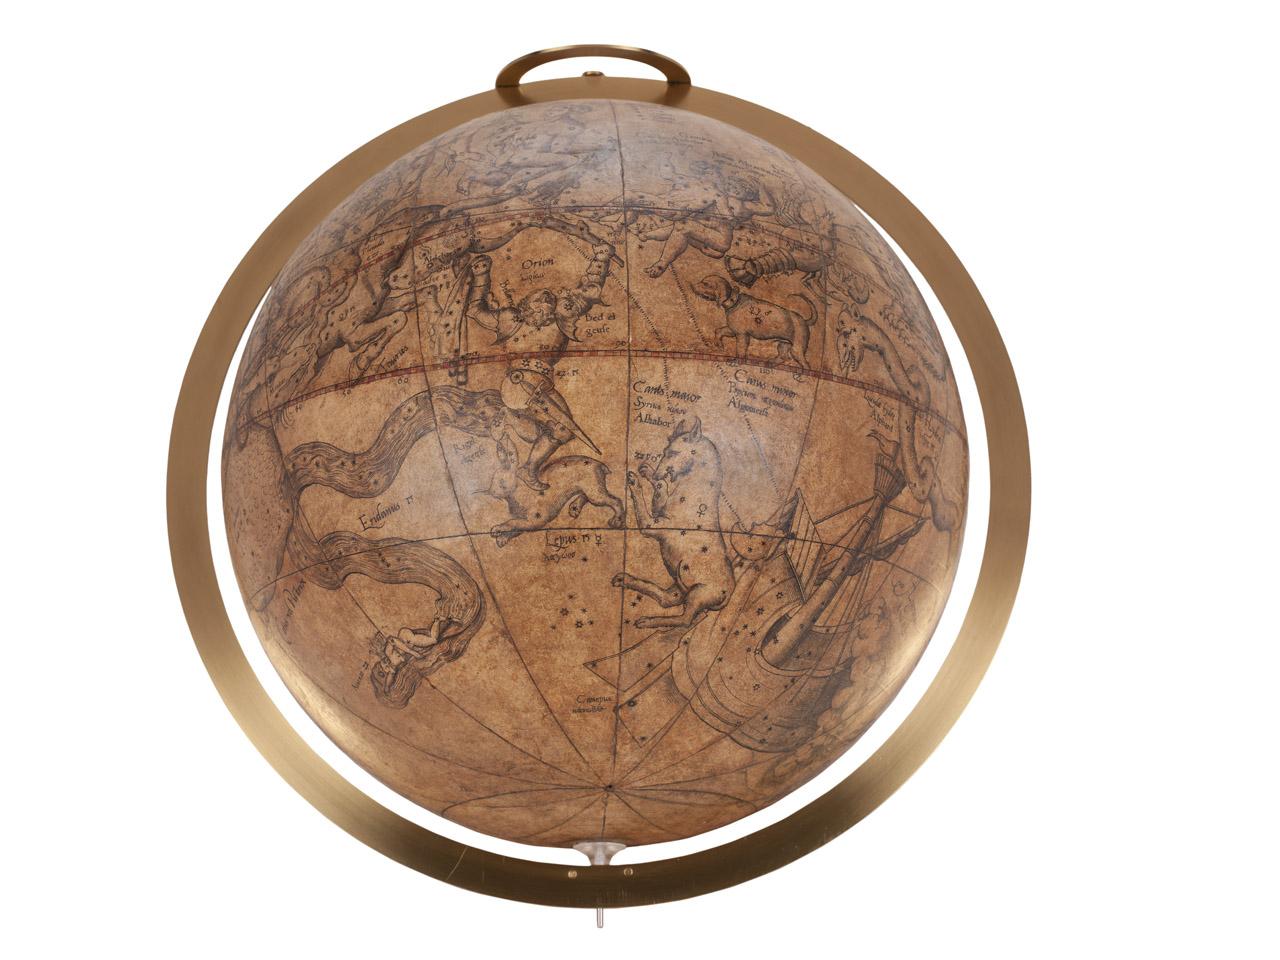 Produced in 1537, this is oldest globe in the collection.